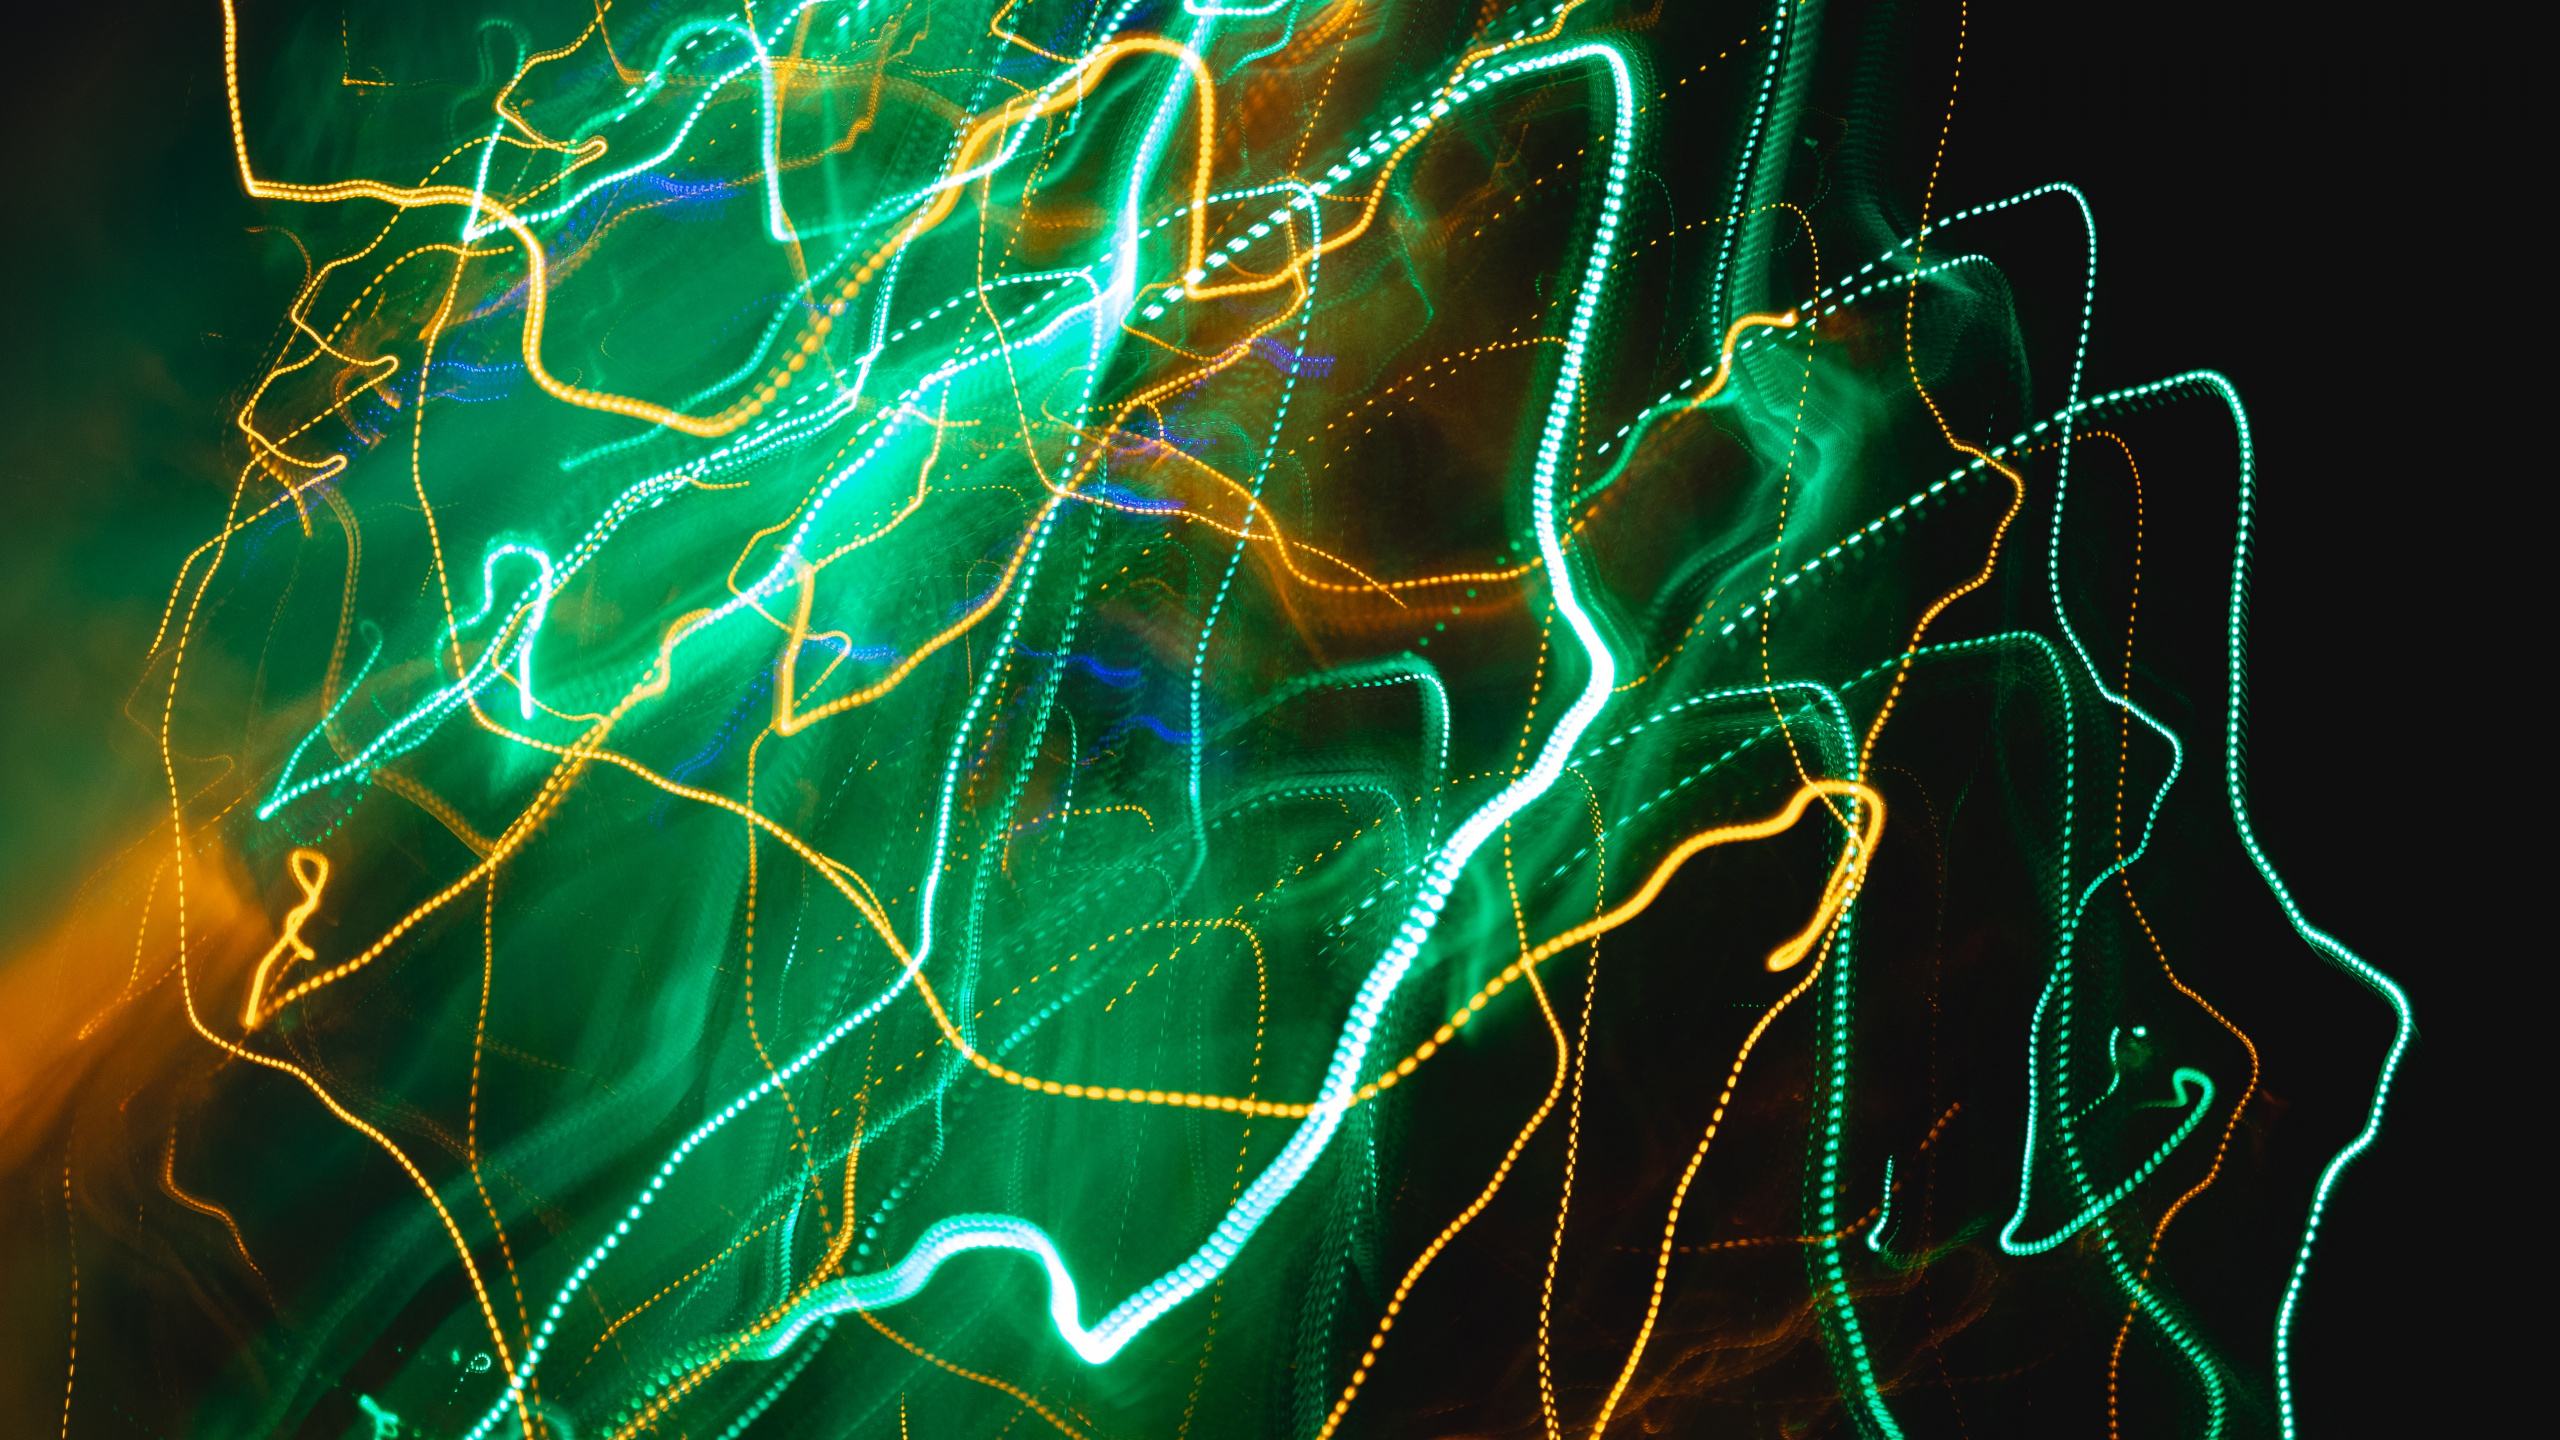 Green and Blue Abstract Painting. Wallpaper in 2560x1440 Resolution